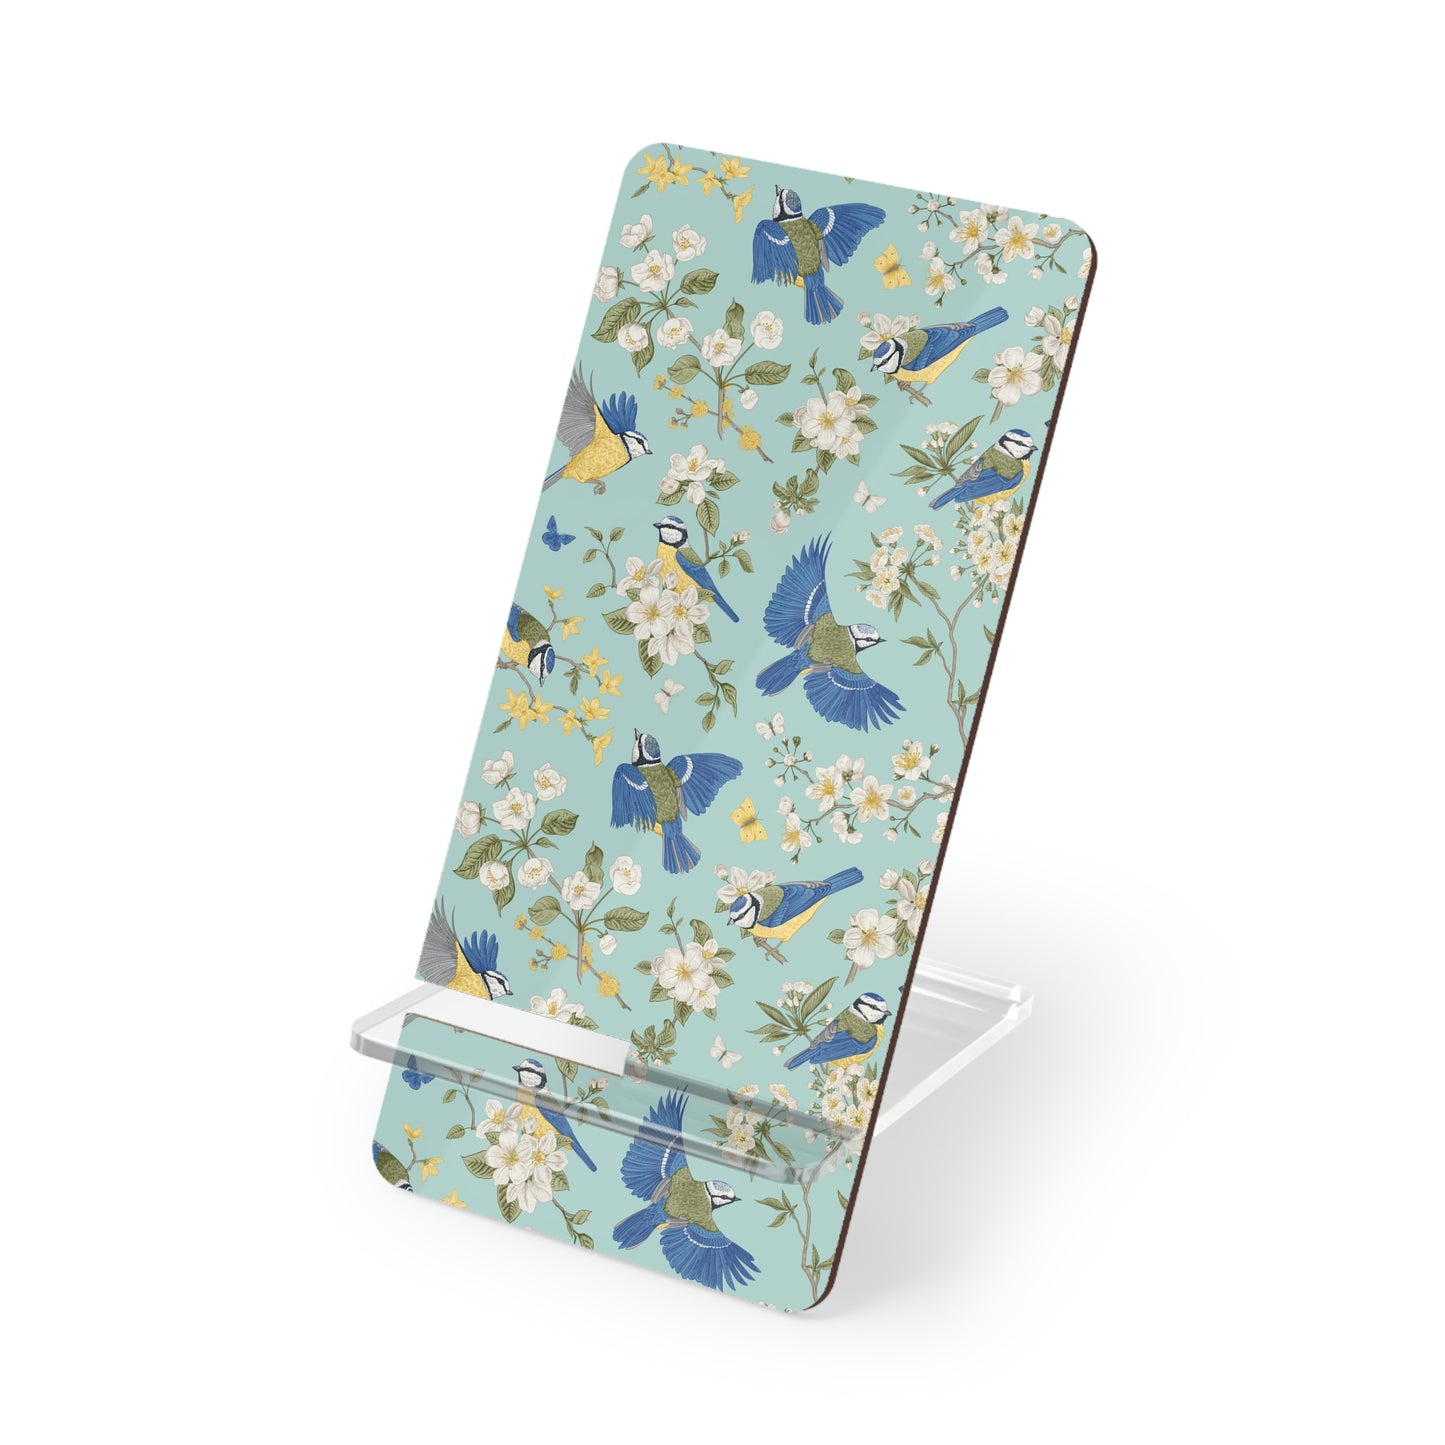 Chinoiserie Birds and Flowers Mobile Display Stand for Smartphones